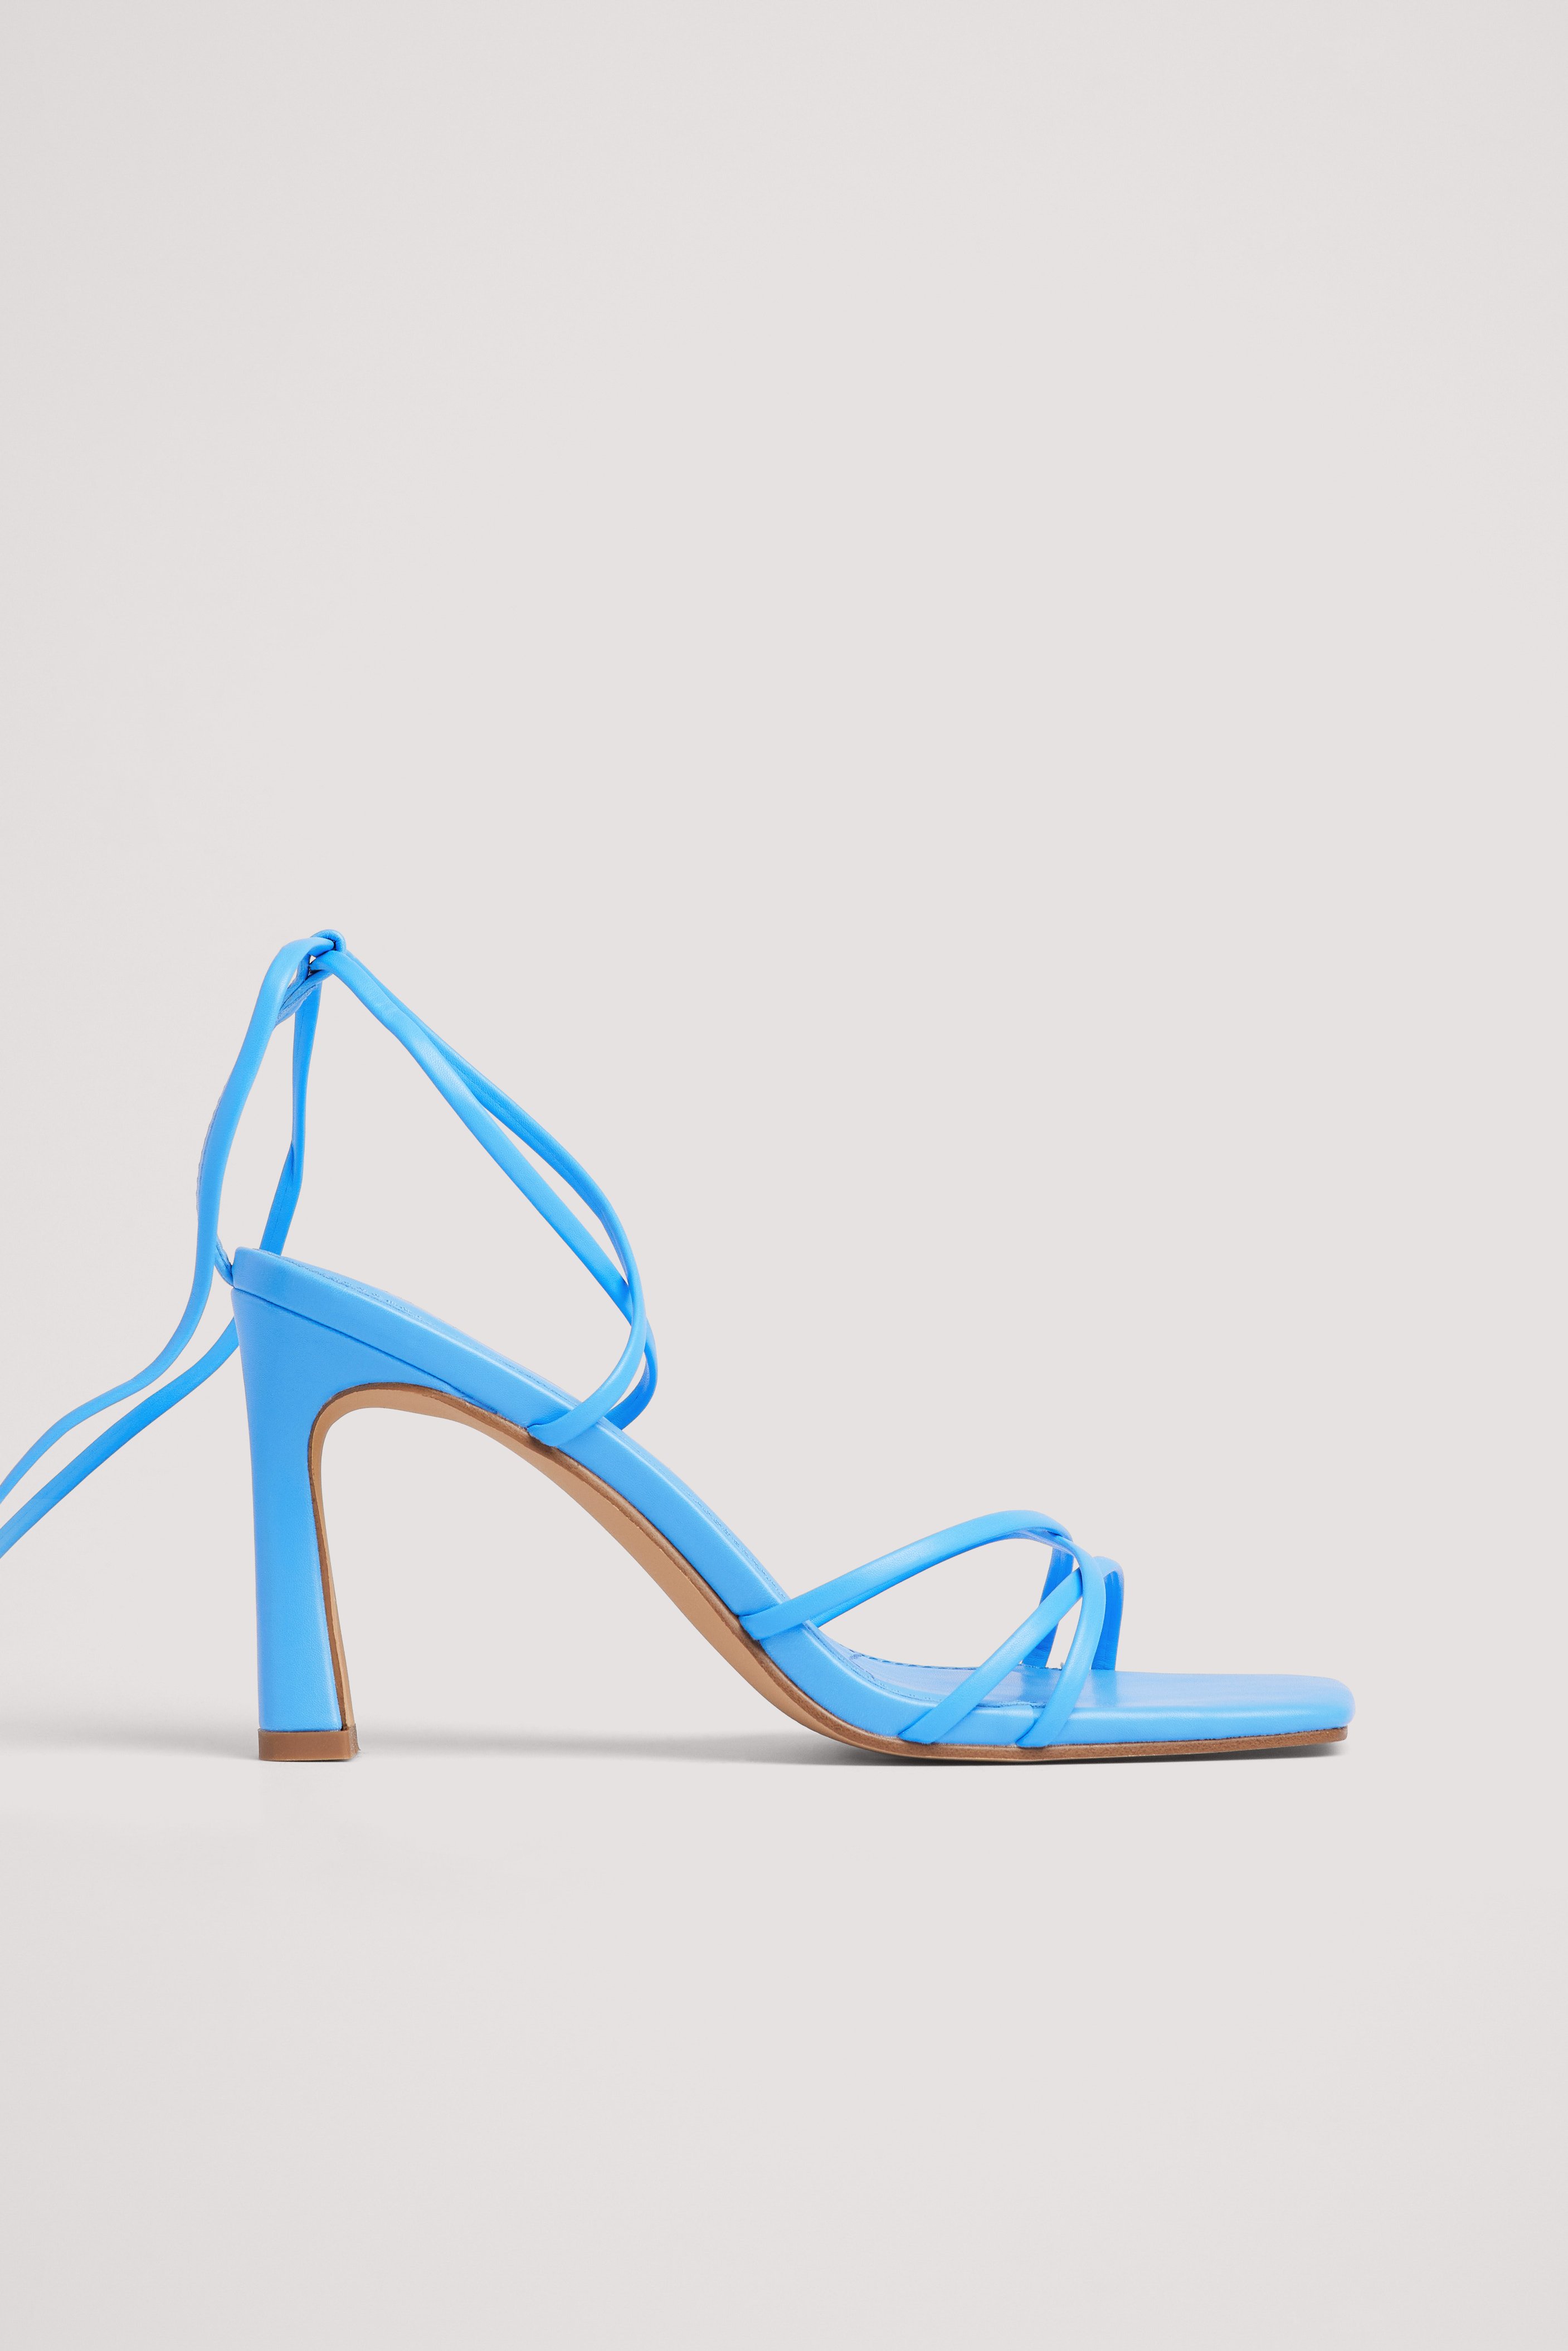 Blue Squared Toe Strappy Heels